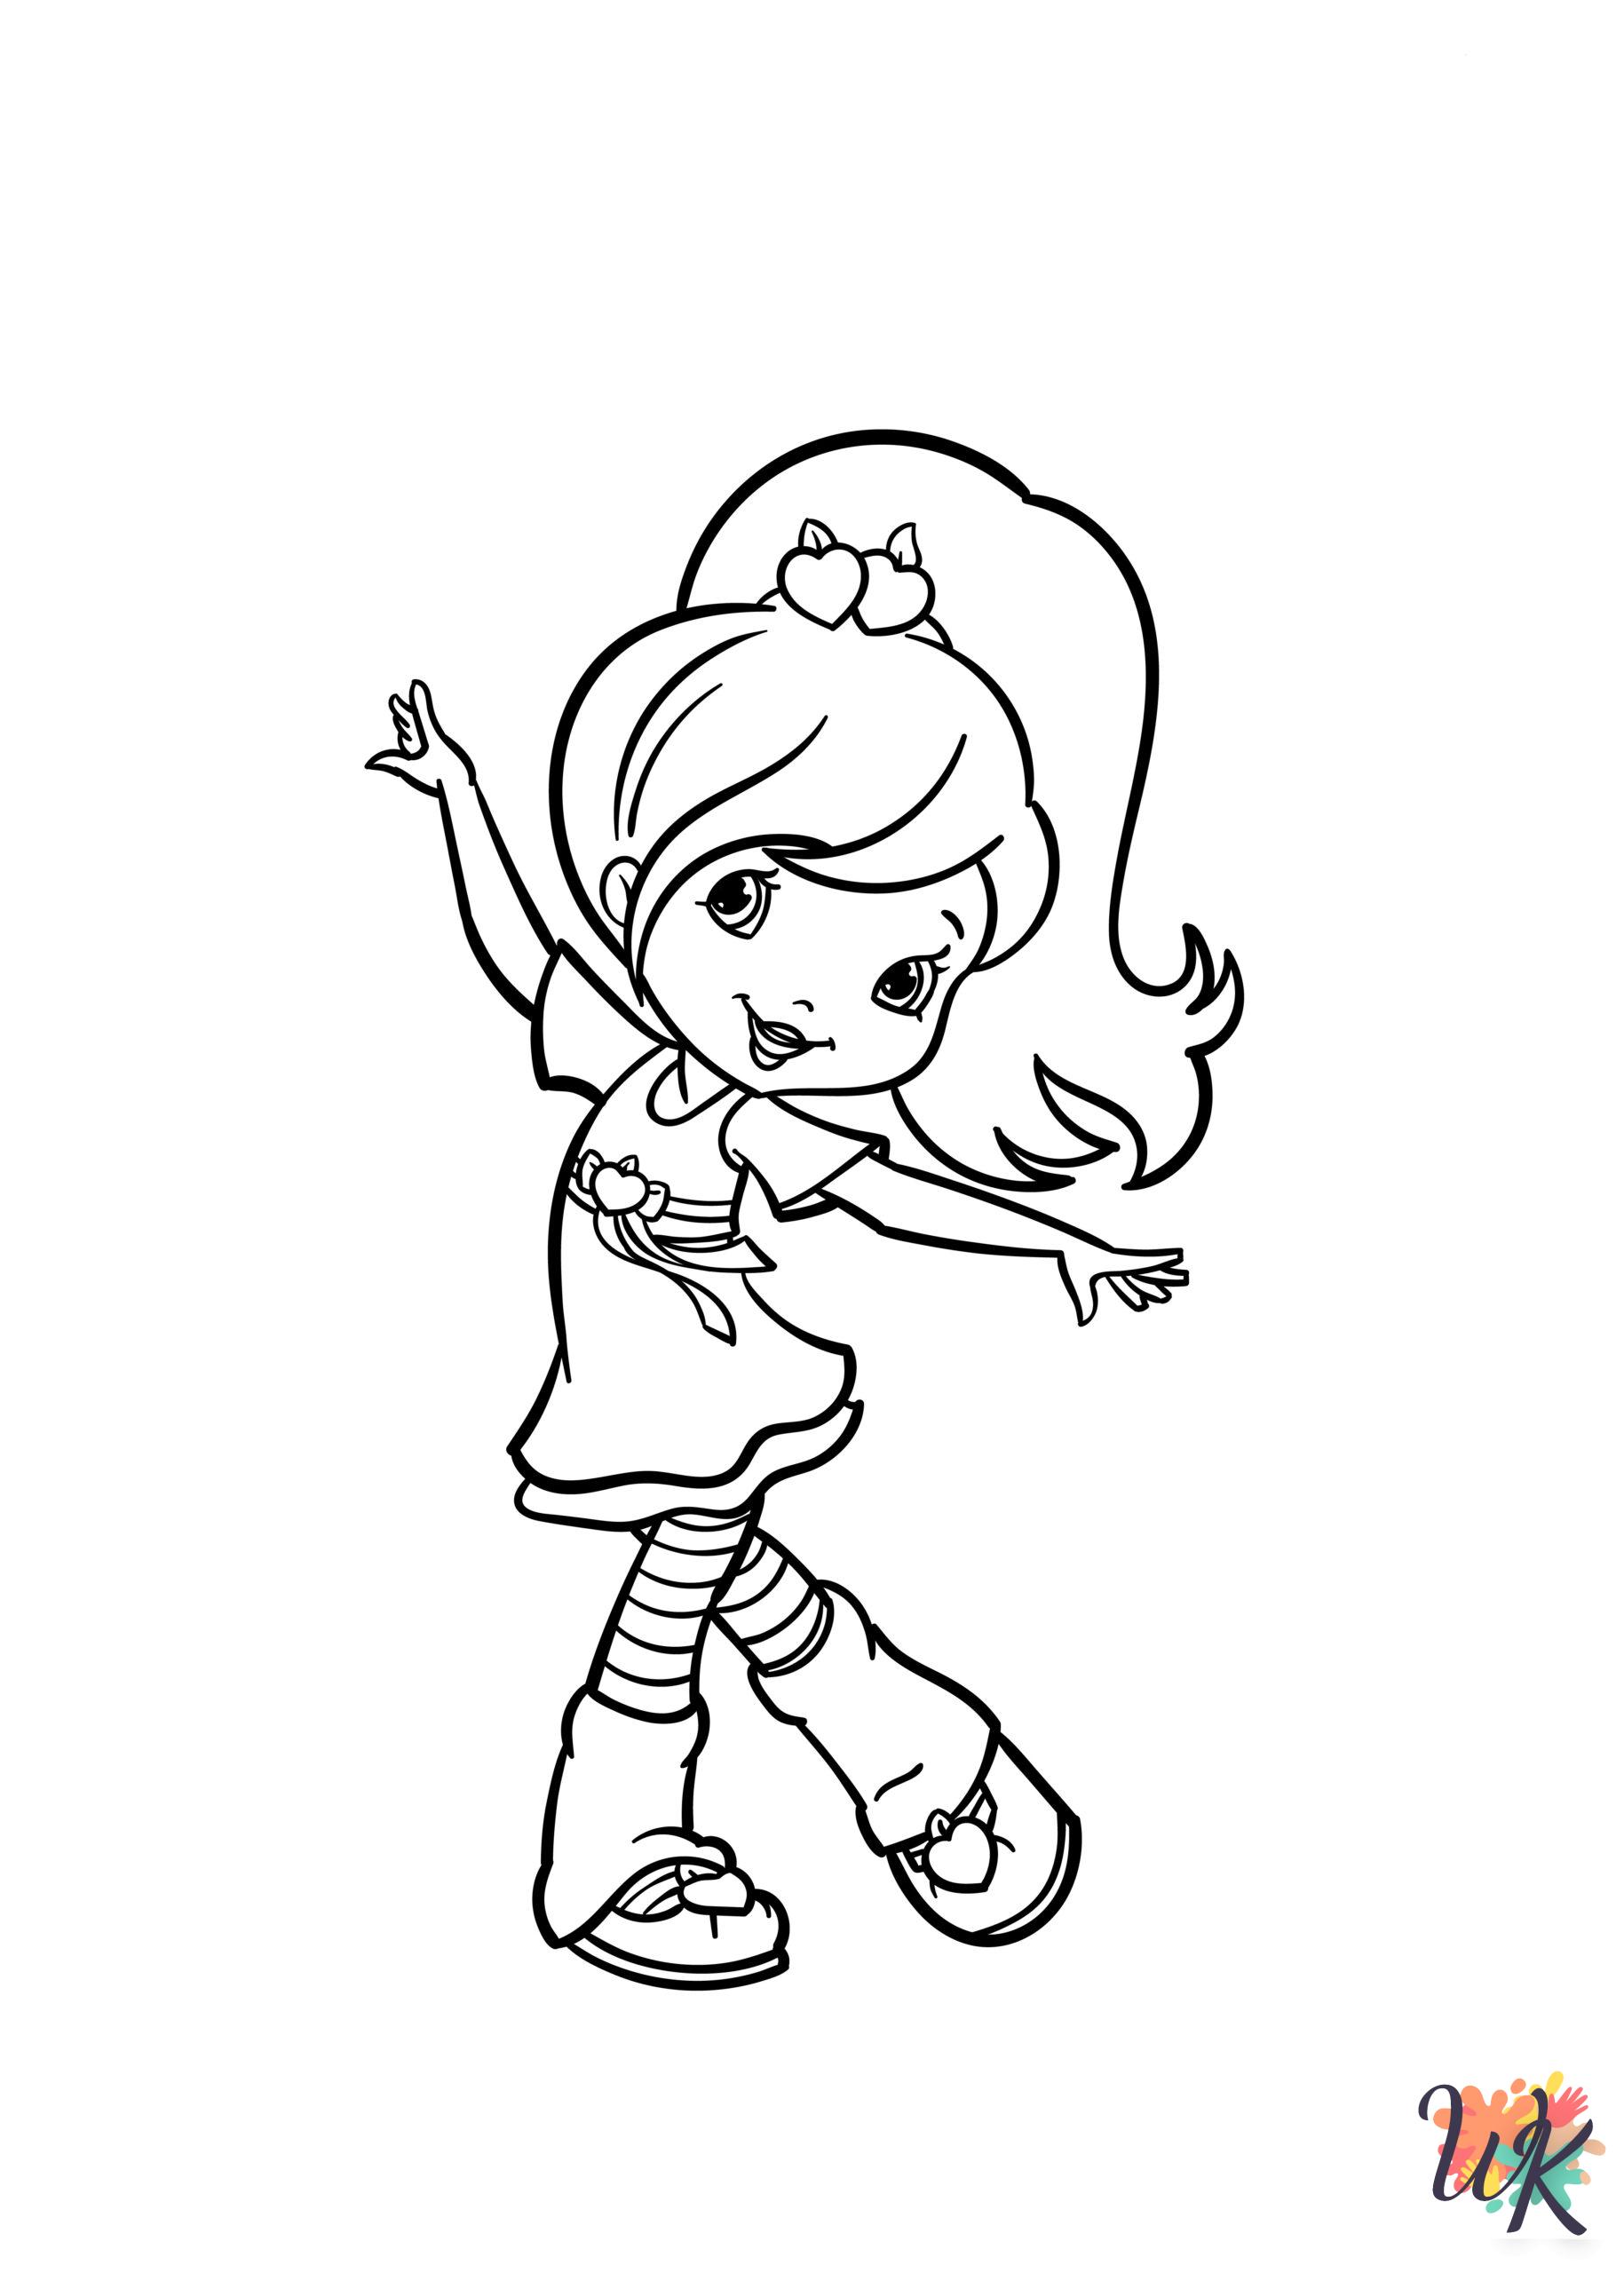 Strawberry Shortcake coloring pages for adults easy